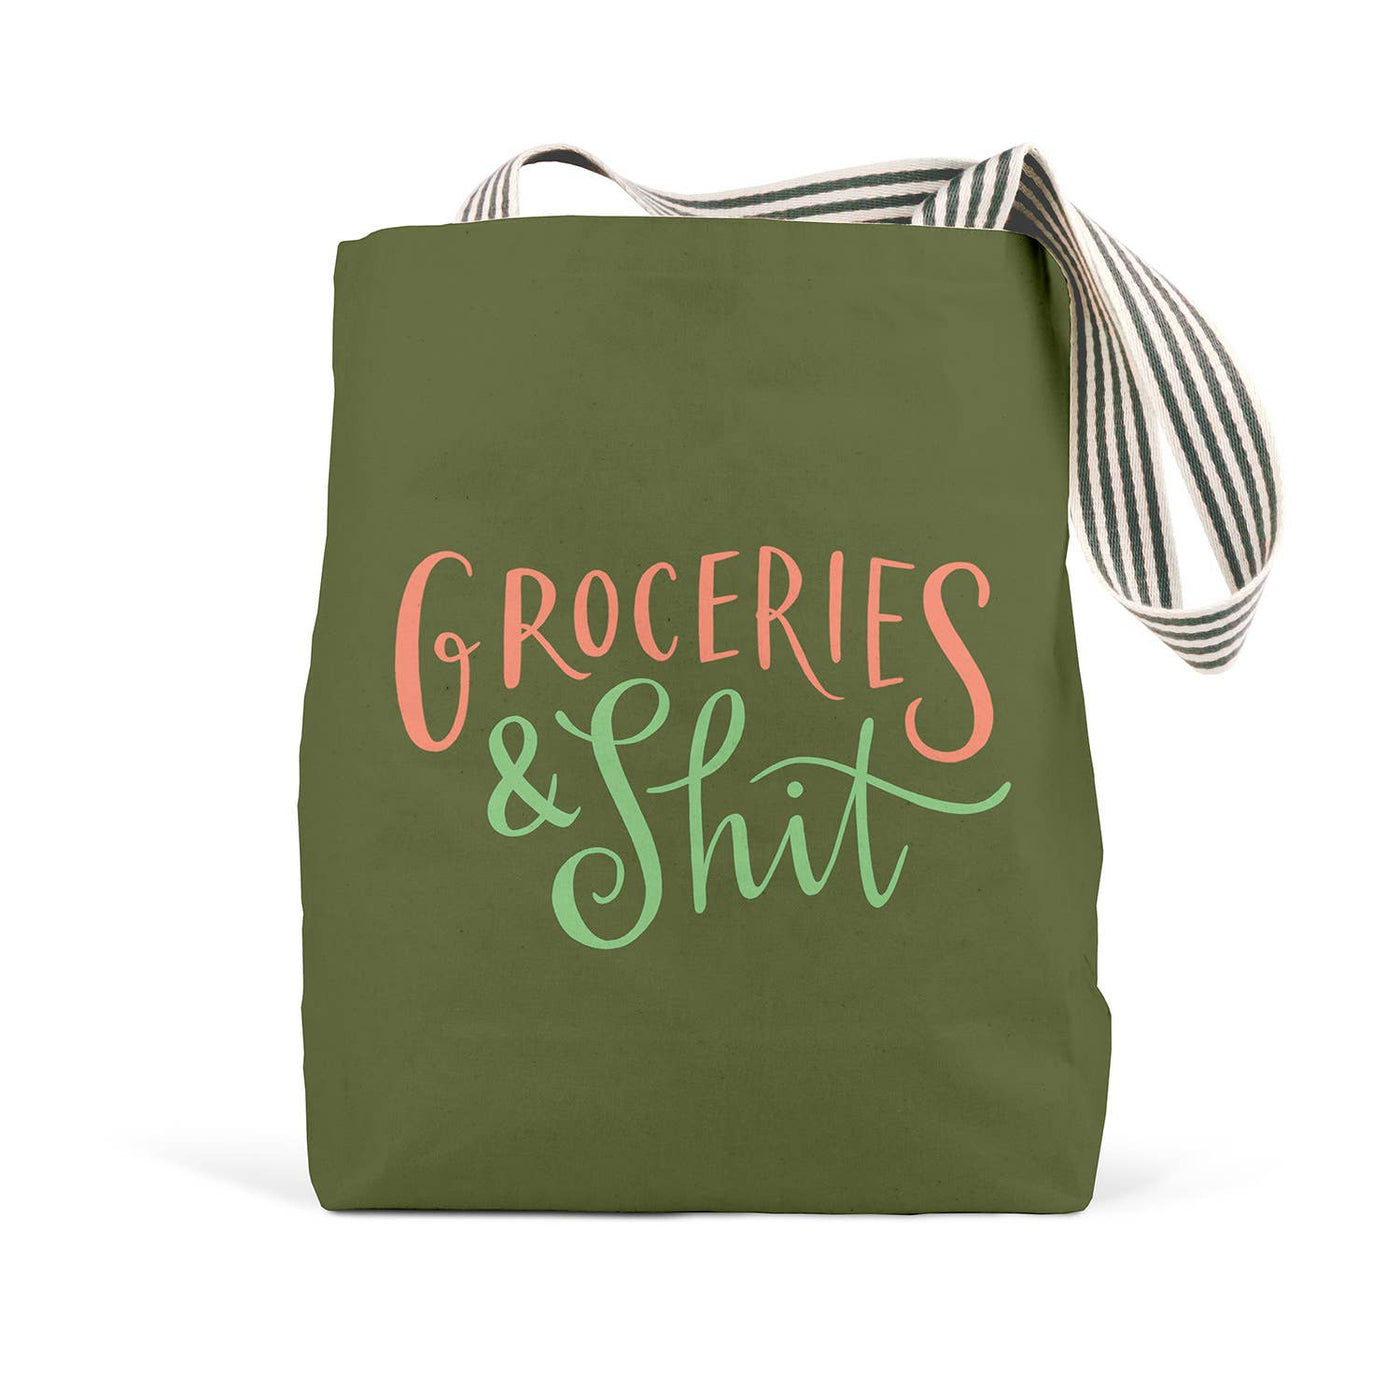 Groceries & Shit Tote Bag (Olive)